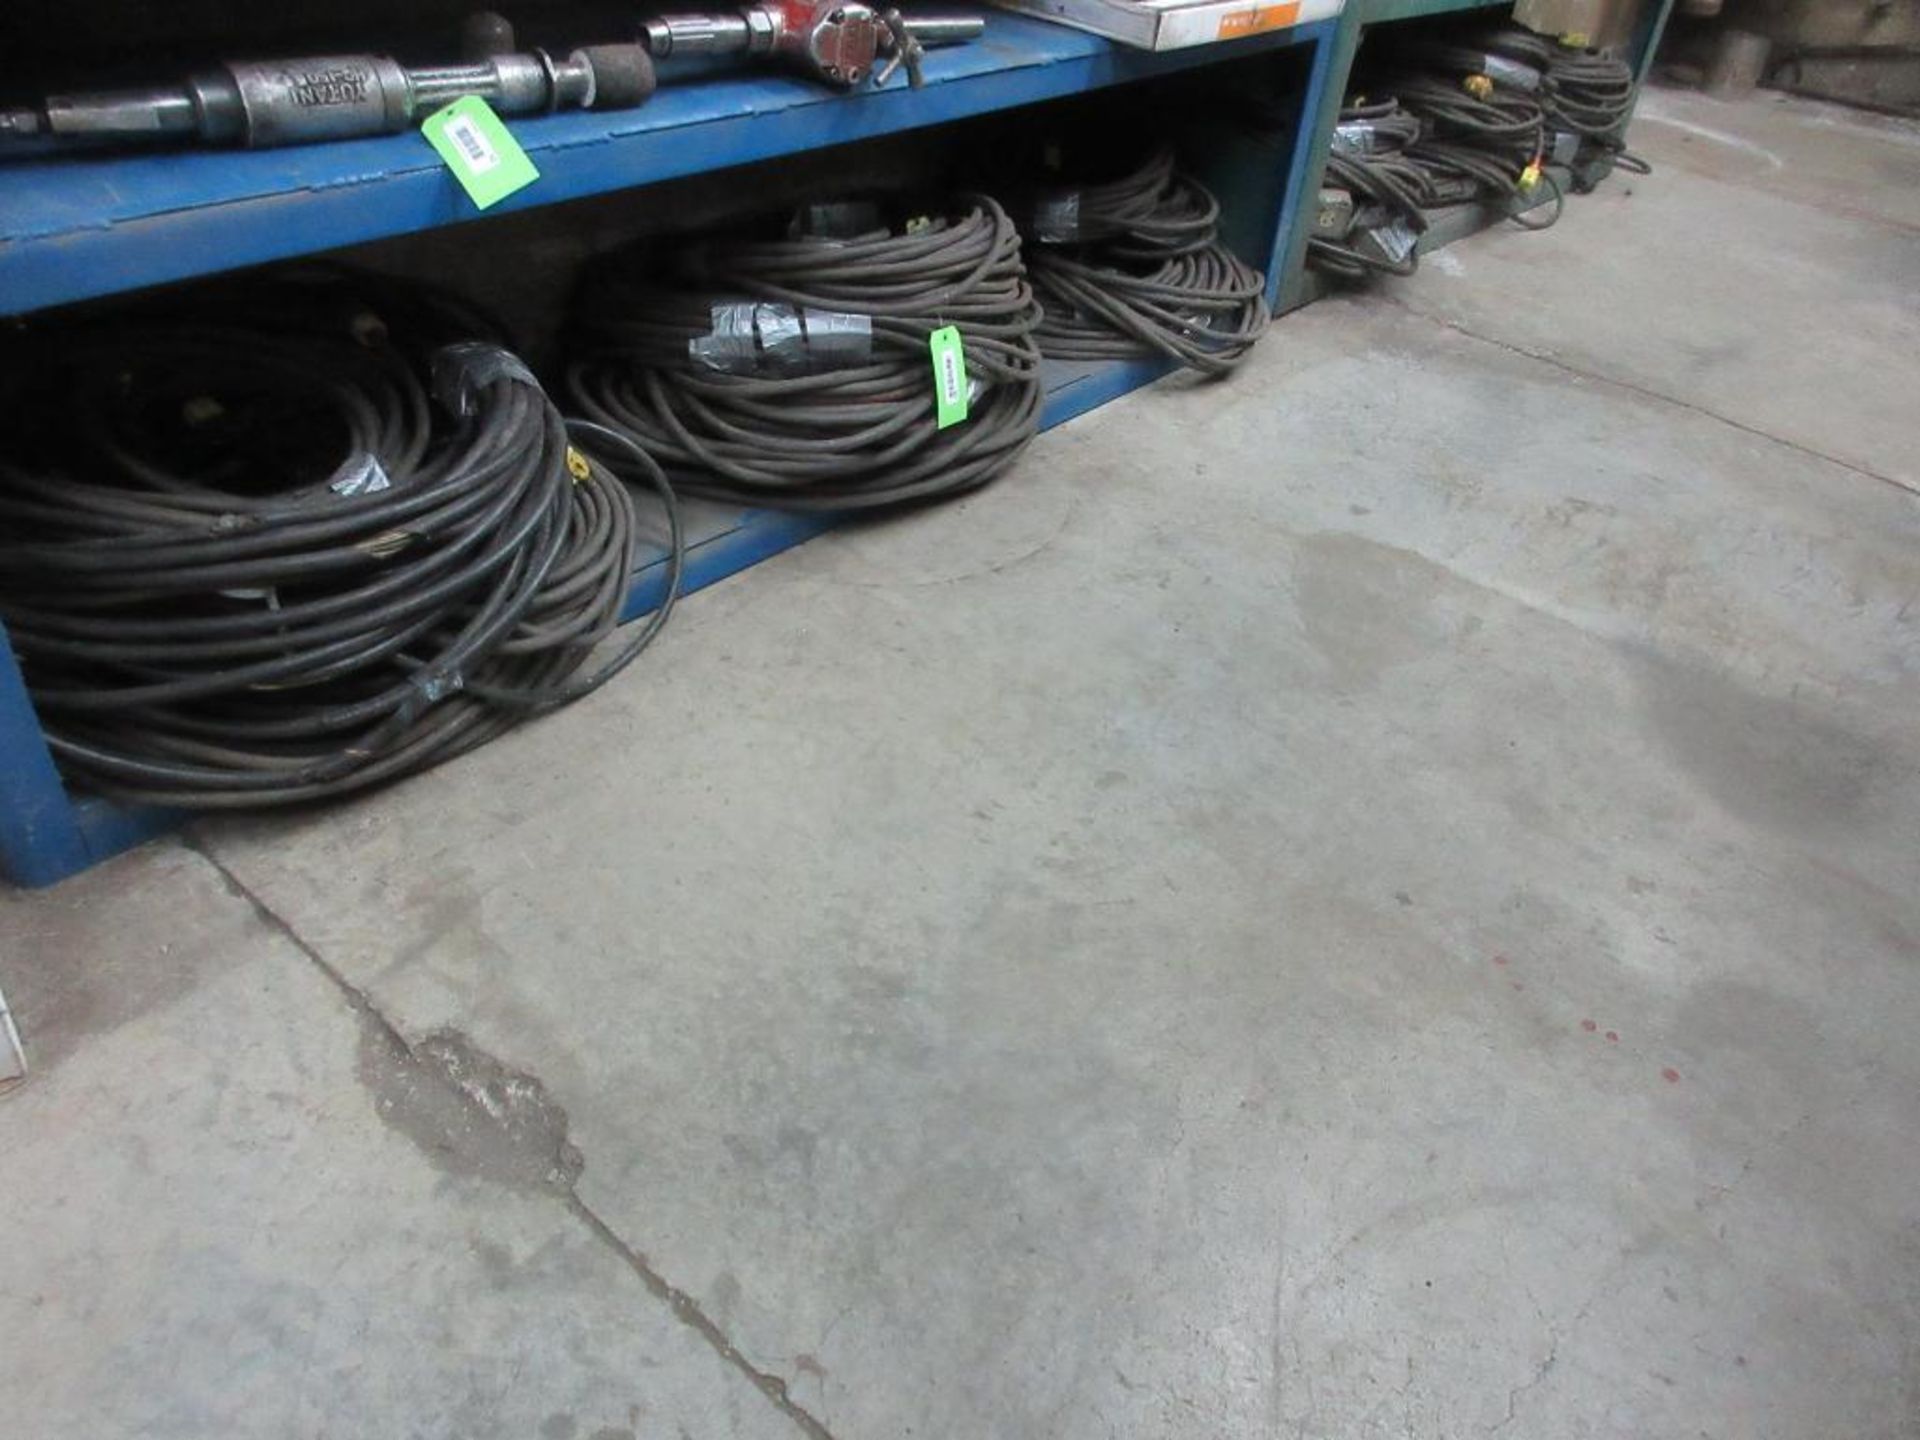 LOT OF 6 STACKS OF HEAVY DUTY CABLES (CENTRAL PARTS CRIB)